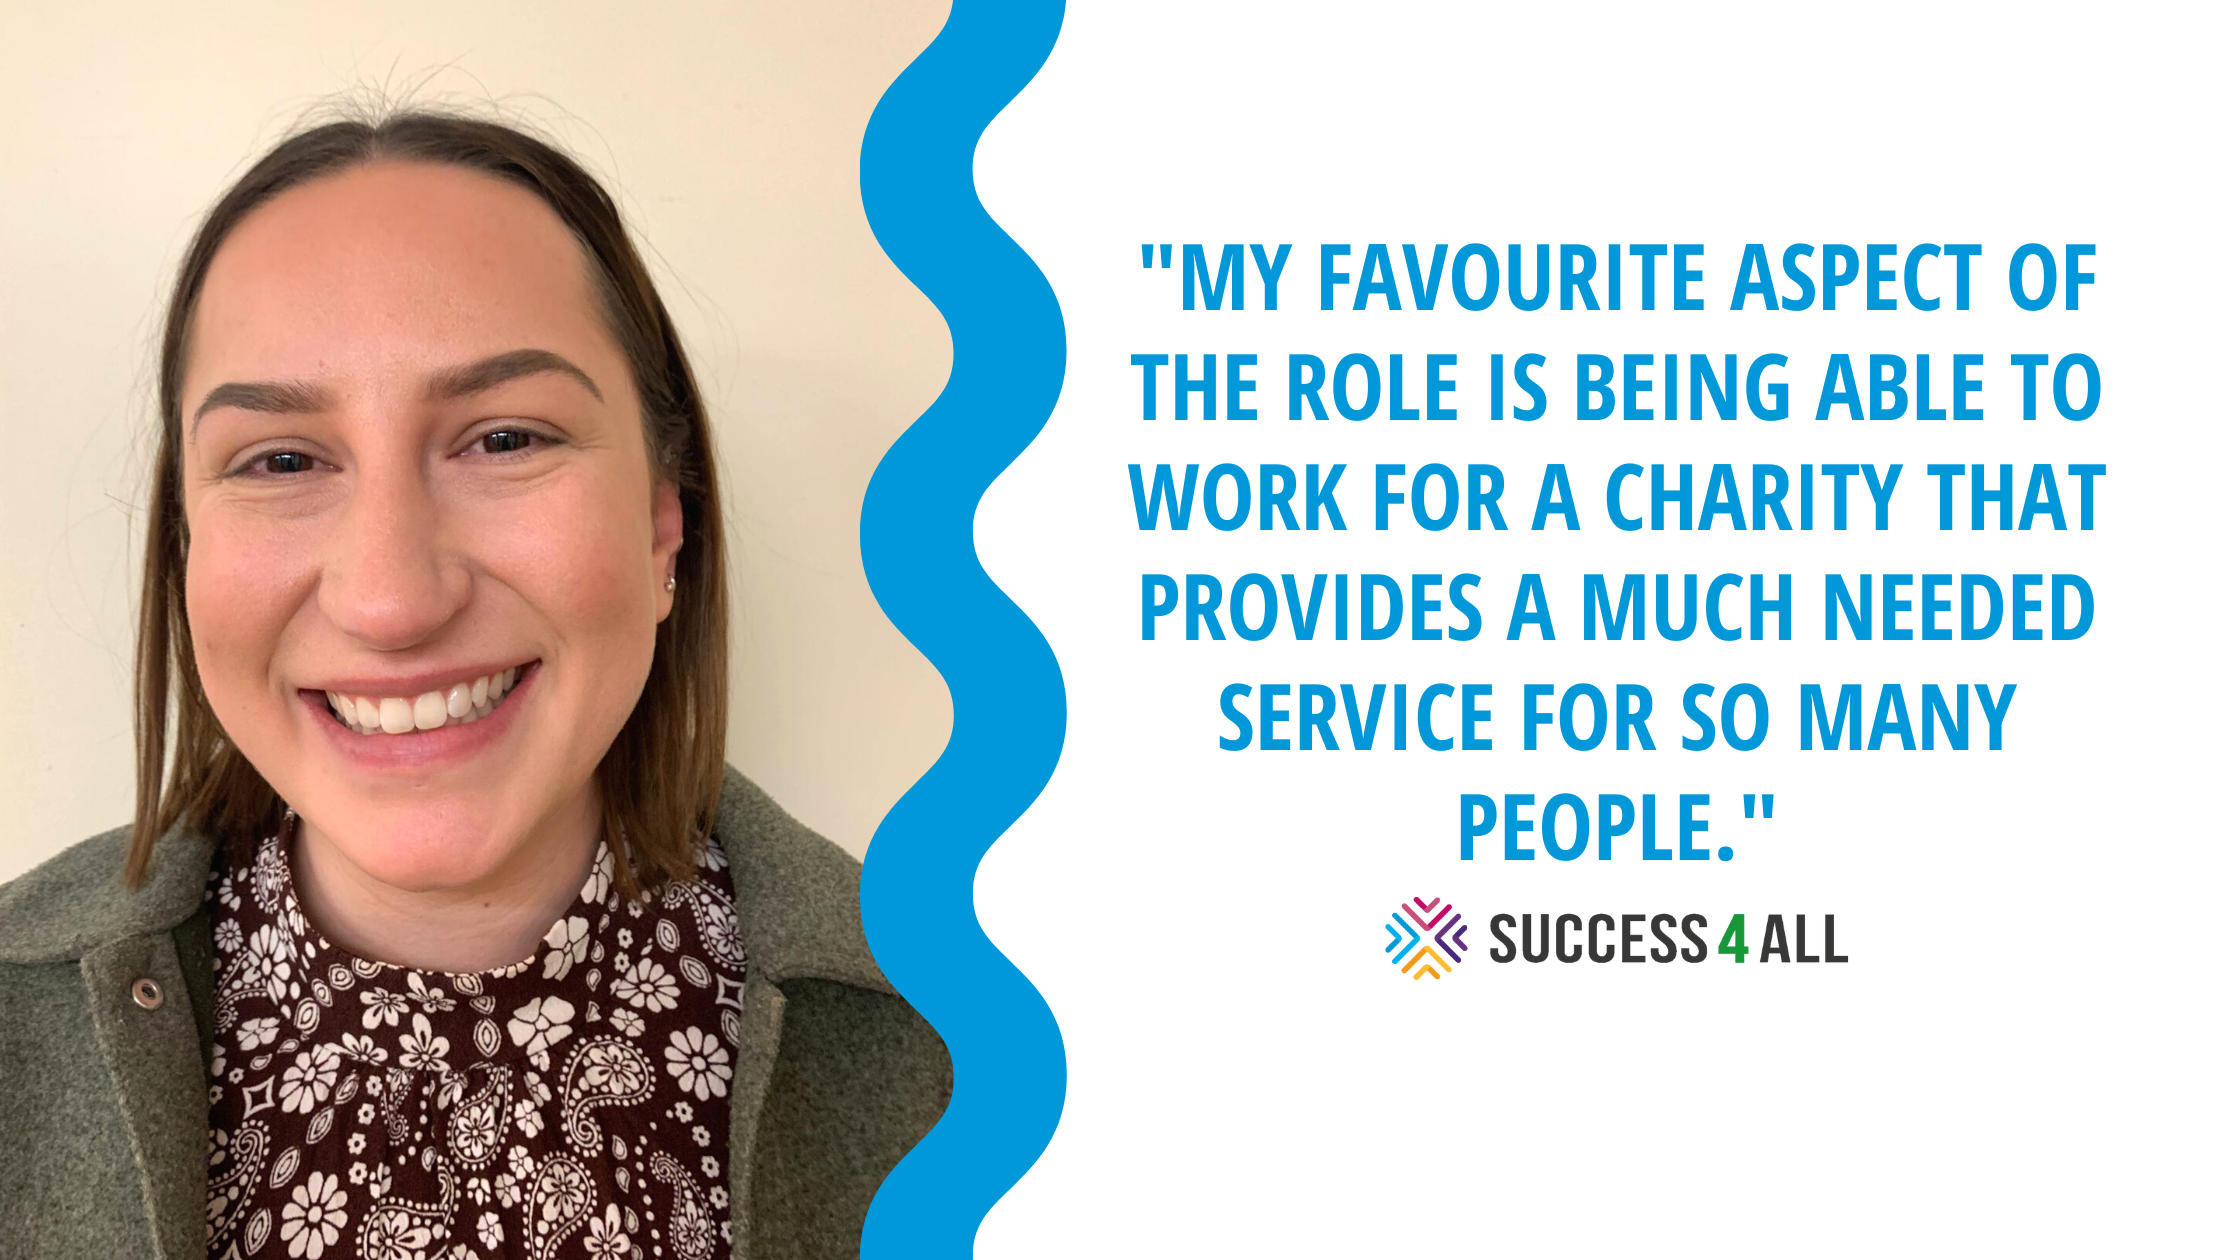 Meet our Team: Louise O'Brien ~ My favourite aspect of the role is being able to work for a charity that provides a much needed service for so many people.